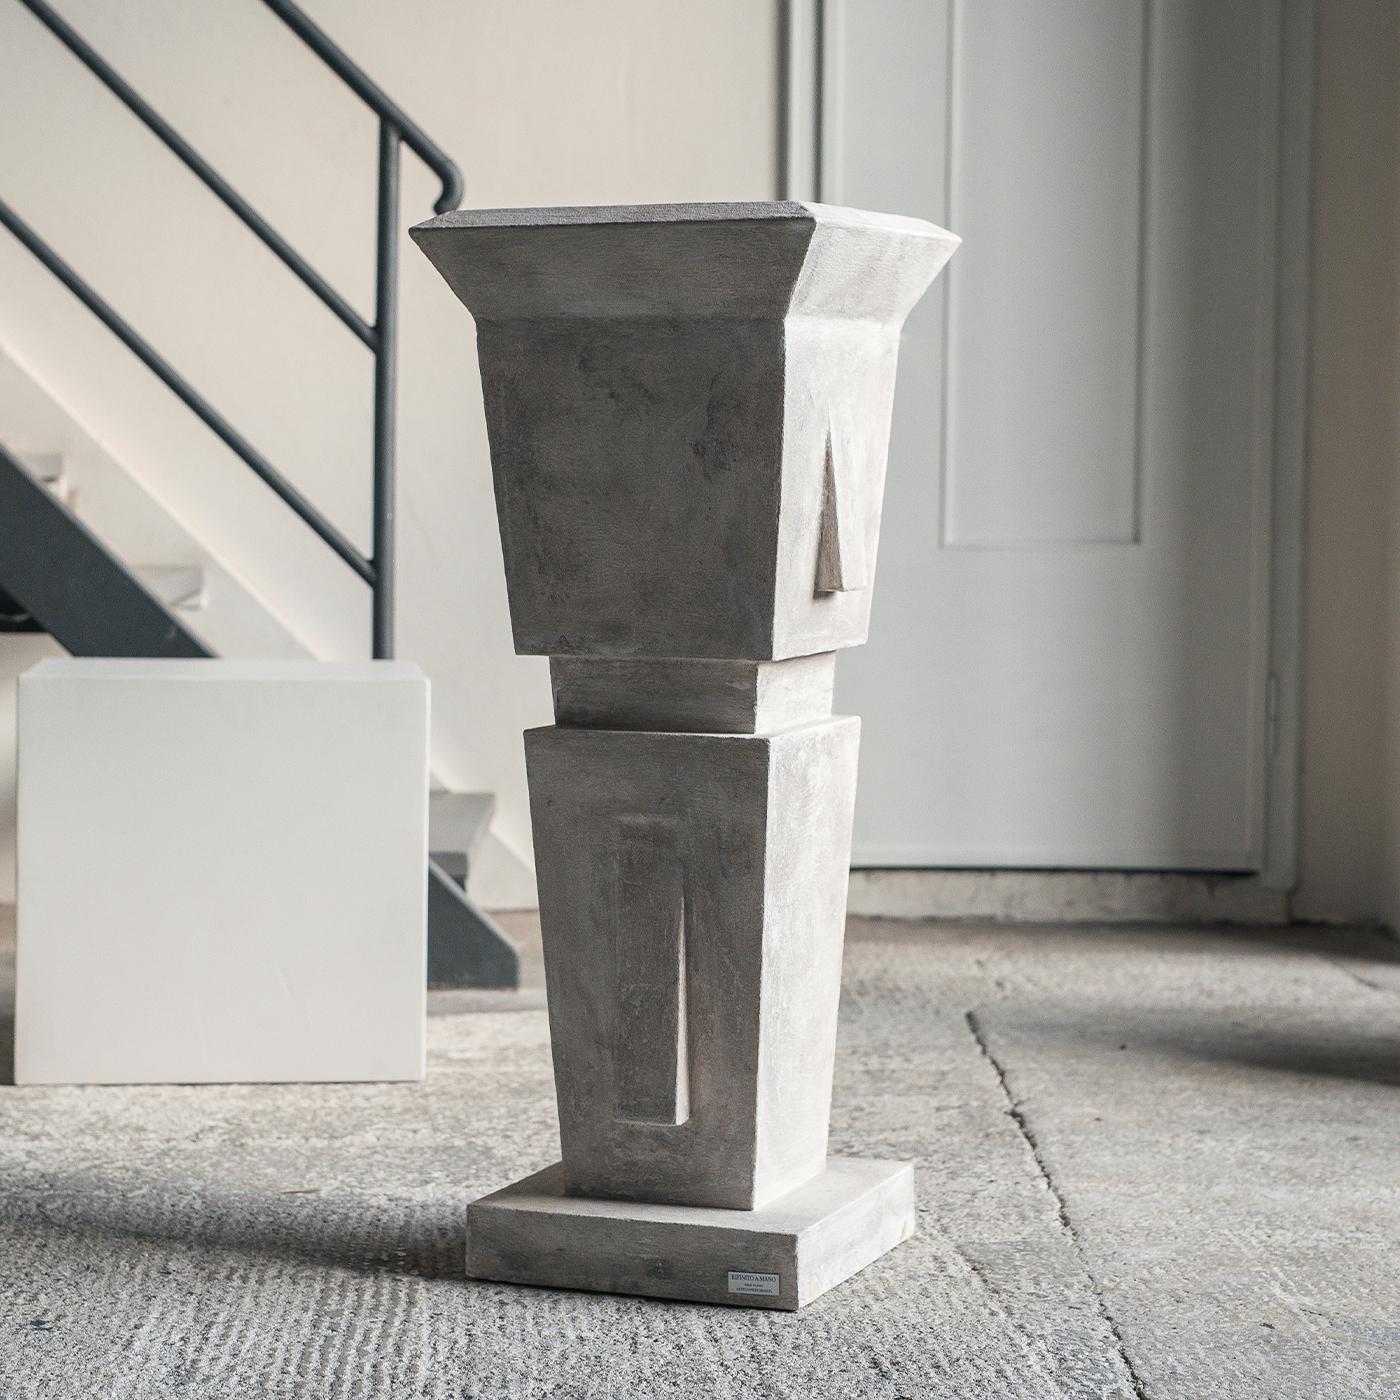 An exquisite decor piece of classic sophistication, this sculpture will complement both contemporary and traditional interiors alike. Handmade of high-density polystyrene with a base in cement, it is finished in a plaster-effect of an antiquated